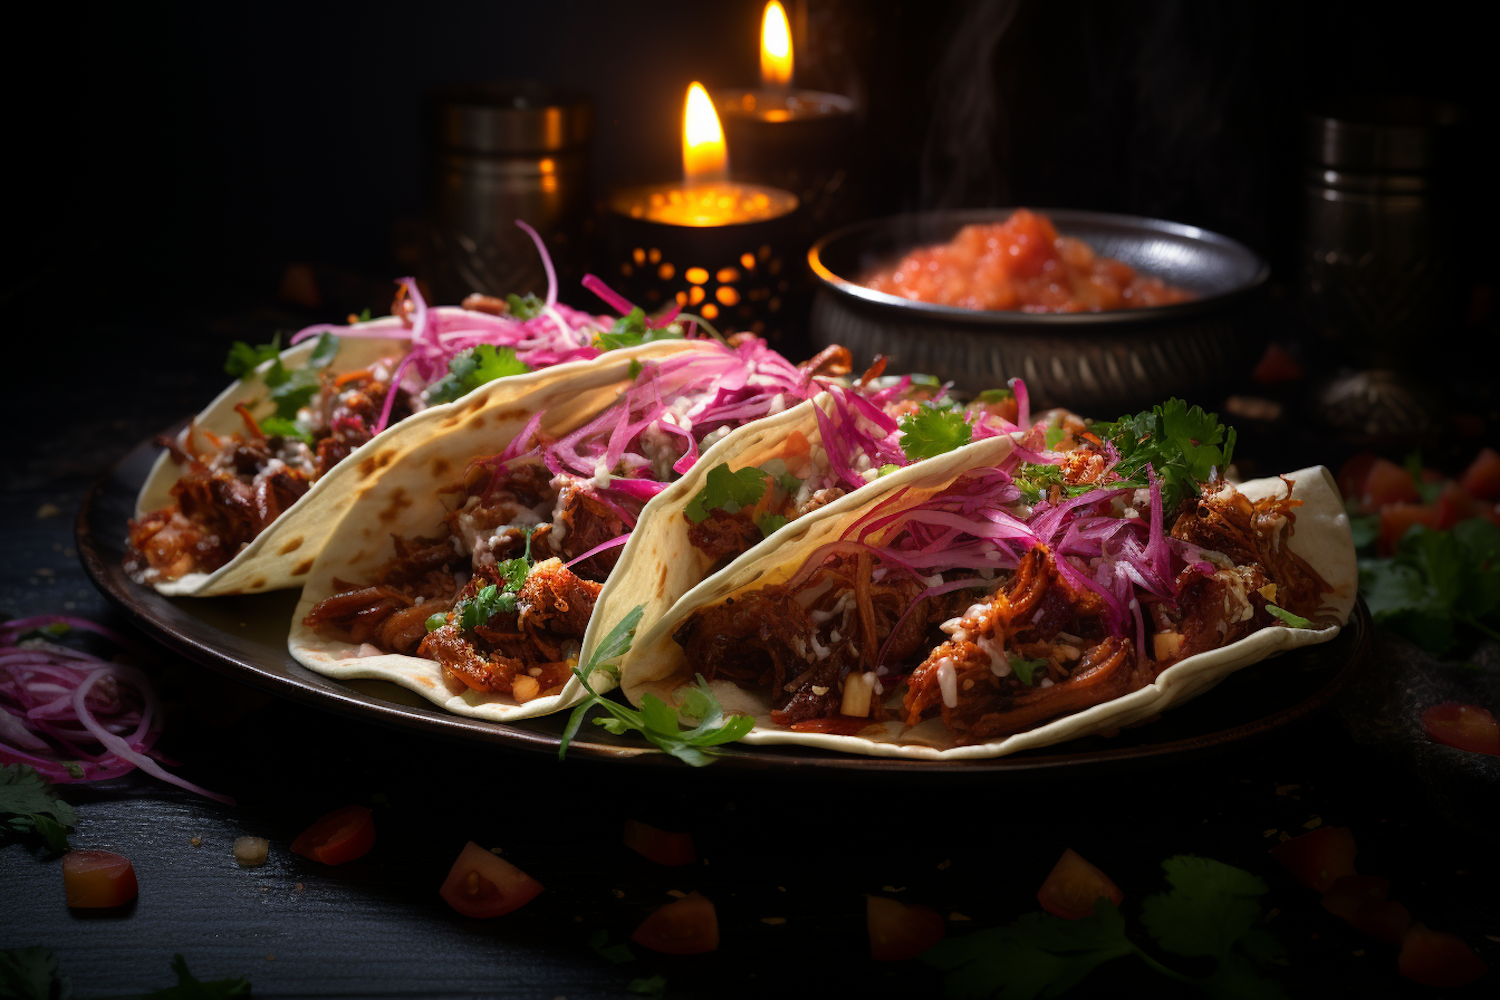 Candlelit Savory Tacos with Pickled Onions and Cilantro